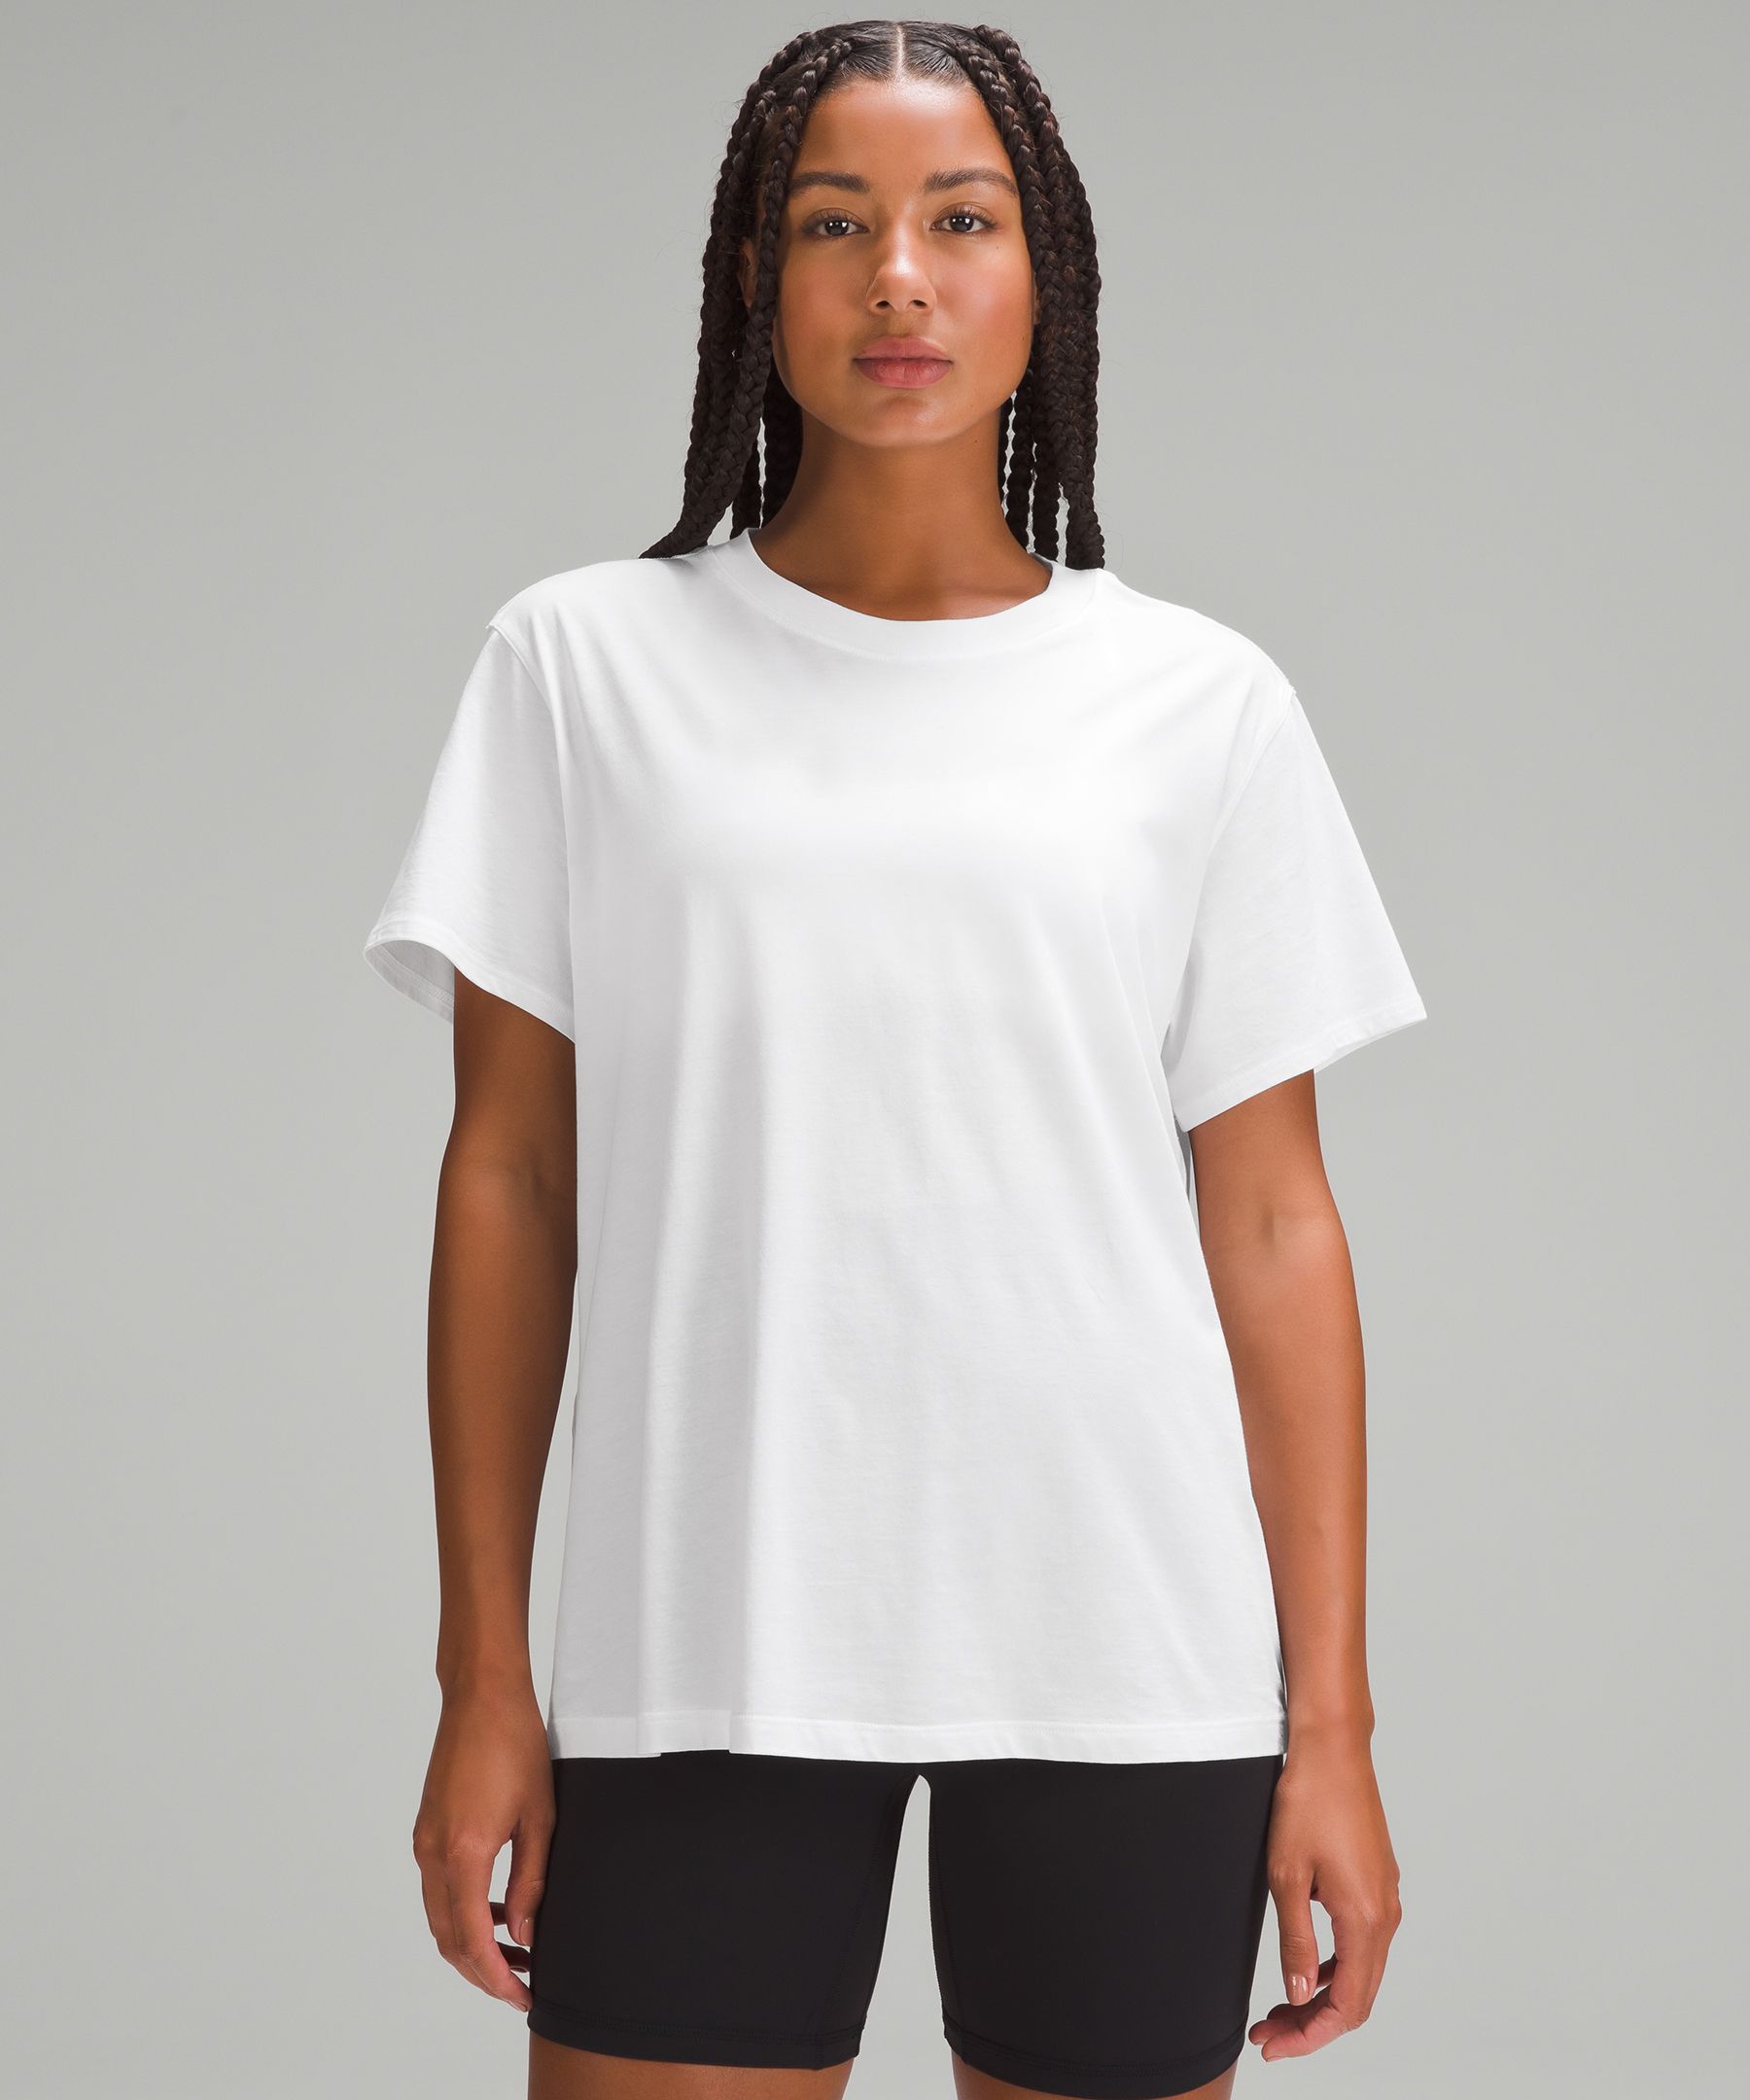 Lululemon All Yours Tee Review - StyledJen